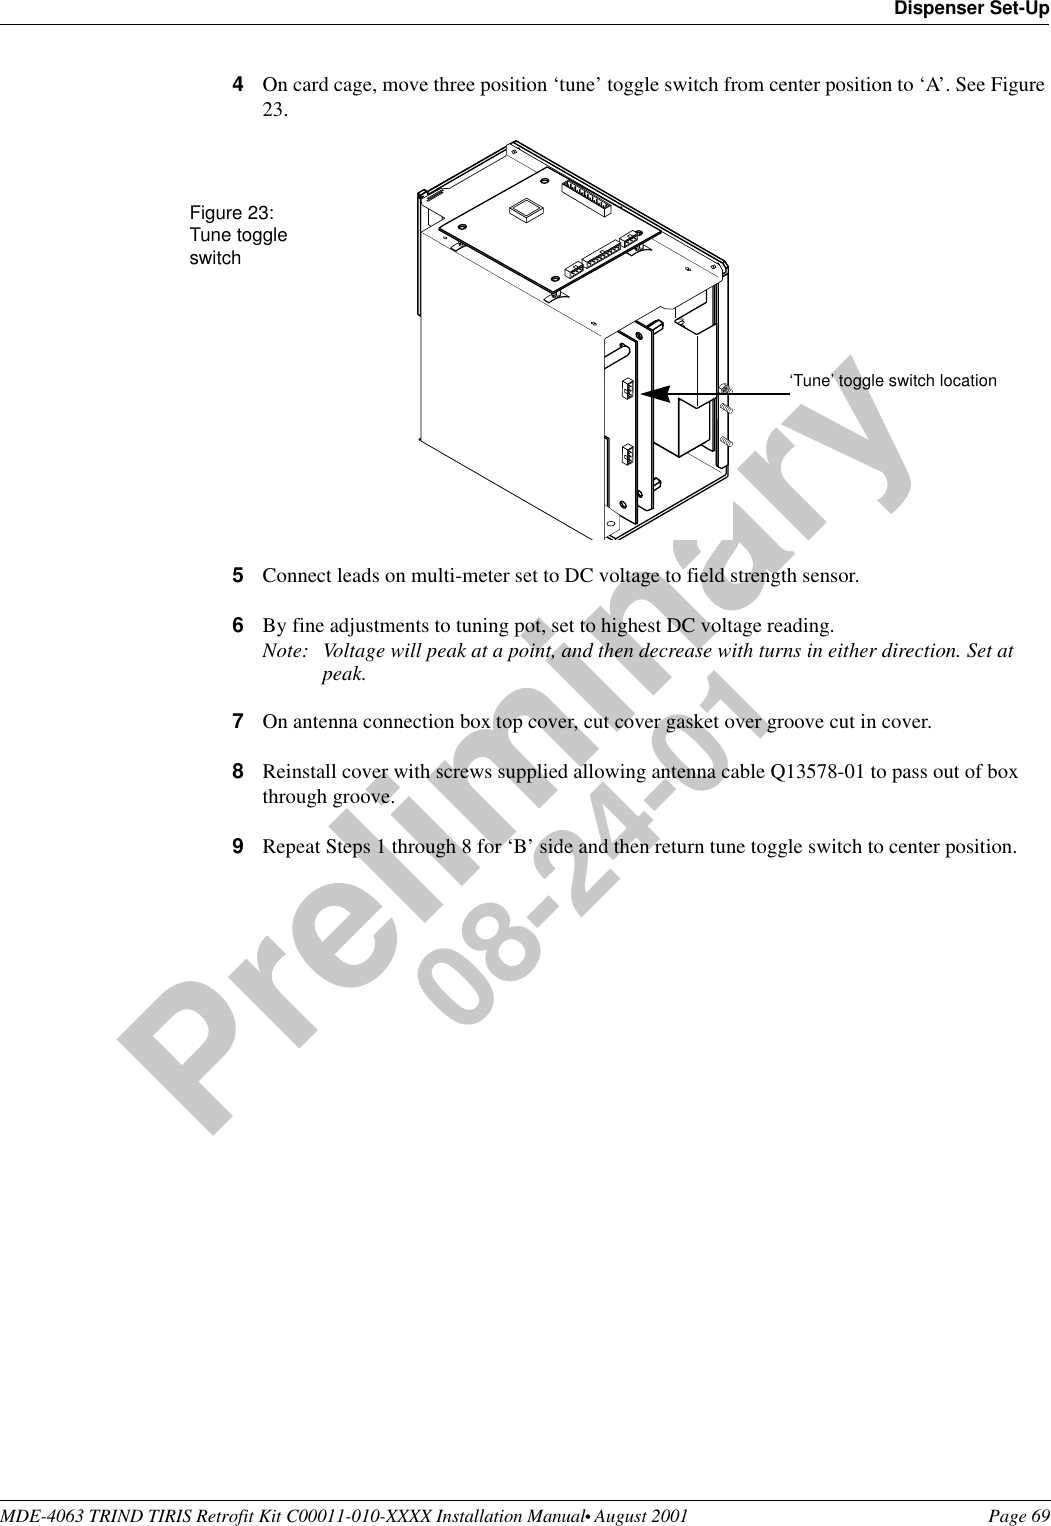 MDE-4063 TRIND TIRIS Retrofit Kit C00011-010-XXXX Installation Manual• August 2001 Page 69Dispenser Set-UpPreliminary08-24-014On card cage, move three position ‘tune’ toggle switch from center position to ‘A’. See Figure 23.5Connect leads on multi-meter set to DC voltage to field strength sensor.6By fine adjustments to tuning pot, set to highest DC voltage reading.Note: Voltage will peak at a point, and then decrease with turns in either direction. Set at peak.7On antenna connection box top cover, cut cover gasket over groove cut in cover.8Reinstall cover with screws supplied allowing antenna cable Q13578-01 to pass out of box through groove.9Repeat Steps 1 through 8 for ‘B’ side and then return tune toggle switch to center position.‘Tune’ toggle switch locationFigure 23:Tune toggle switch